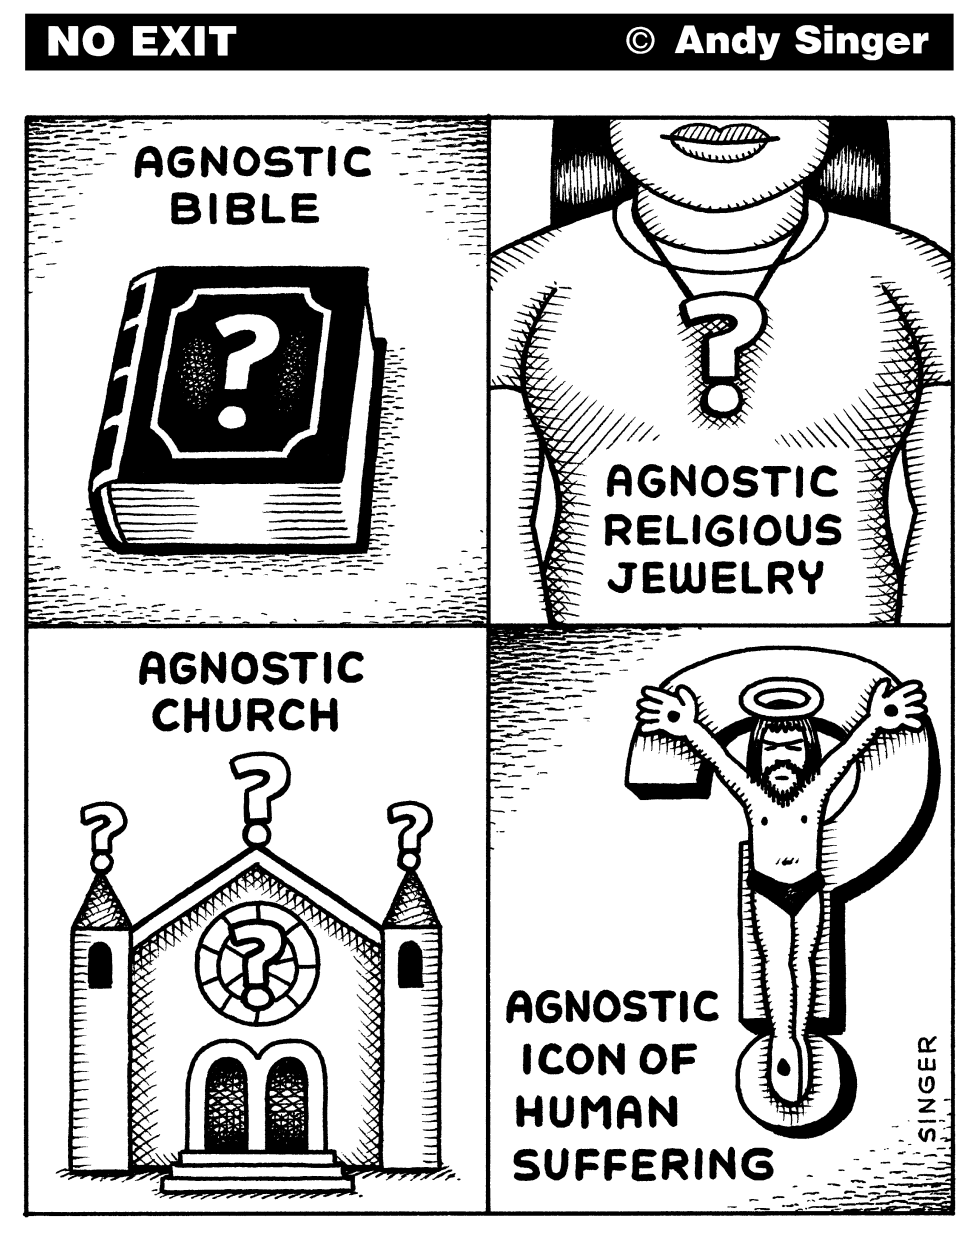  AGNOSTIC BIBLE by Andy Singer